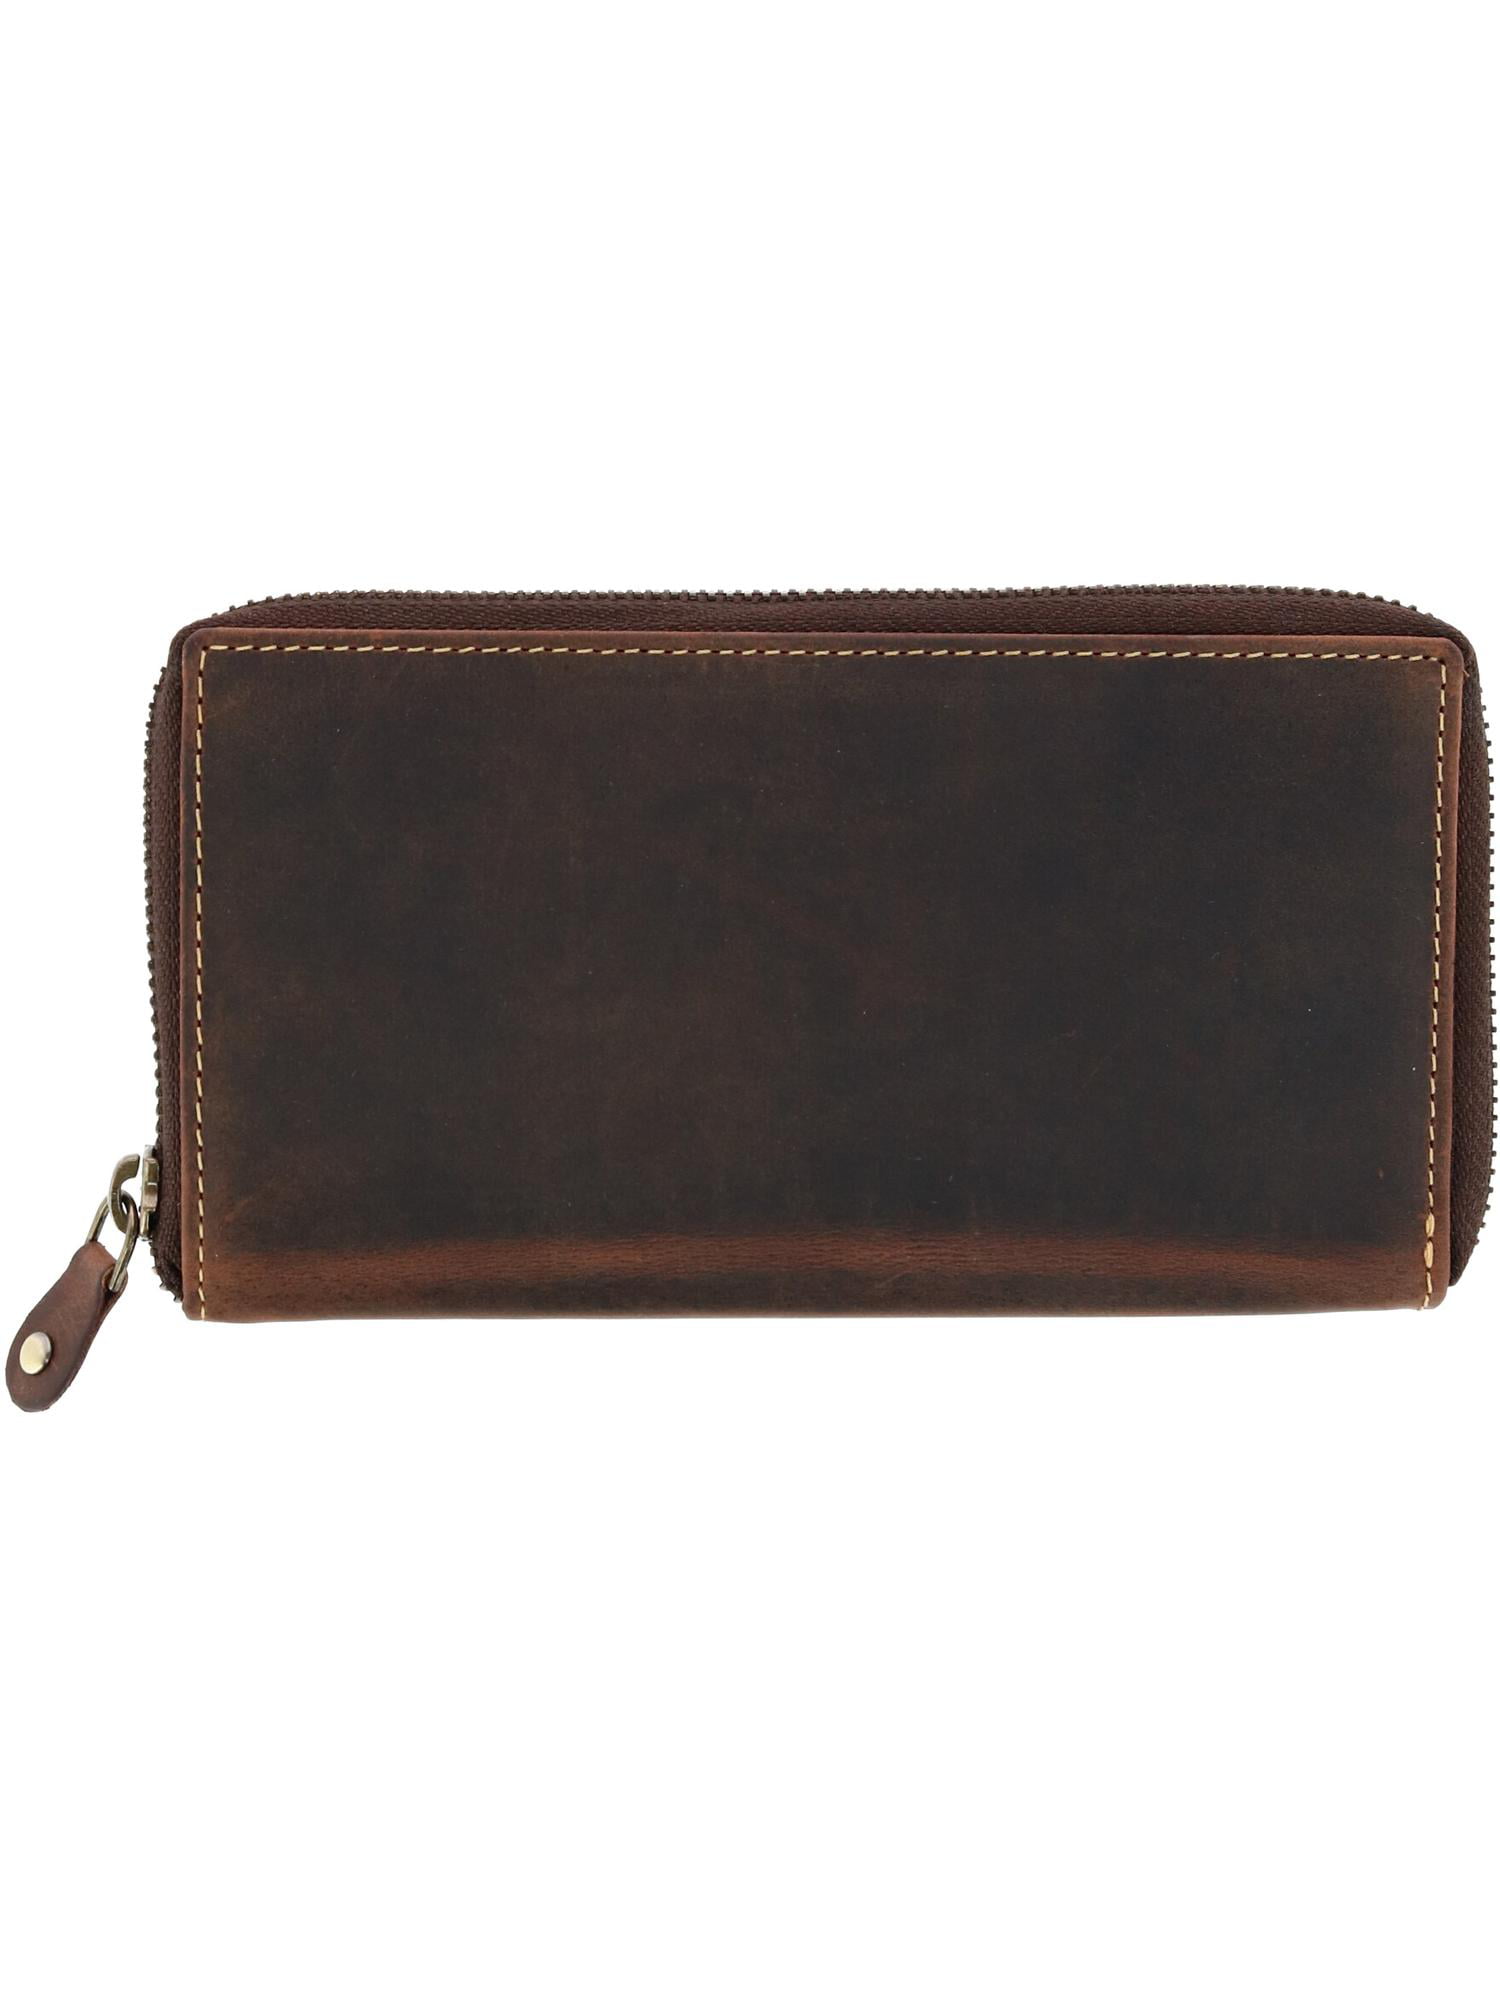 CTM Leather Checkbook Cover 